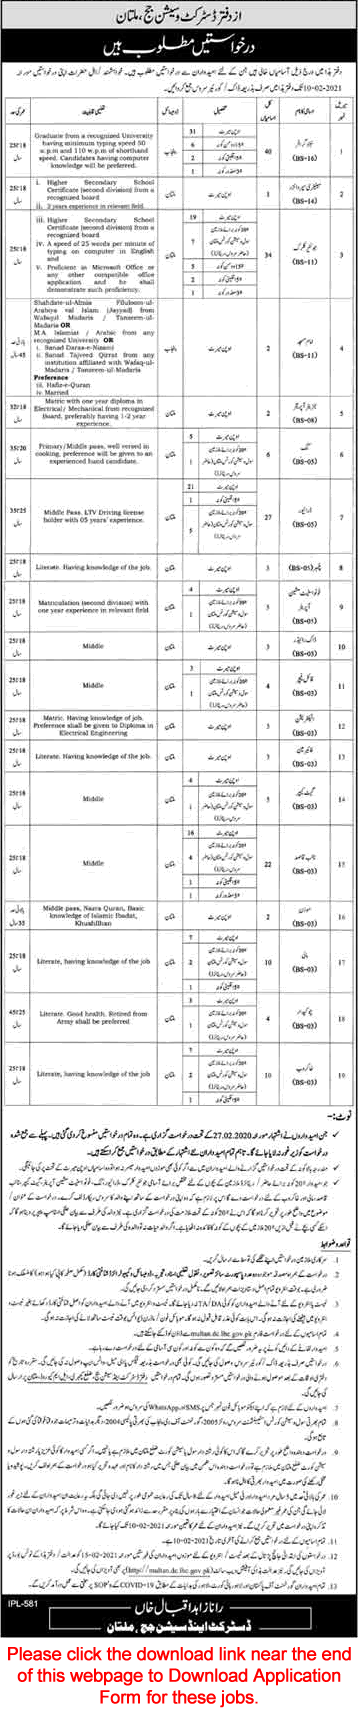 District and Session Court Multan Jobs 2021 Application Form Stenographers, Clerks & Others Latest